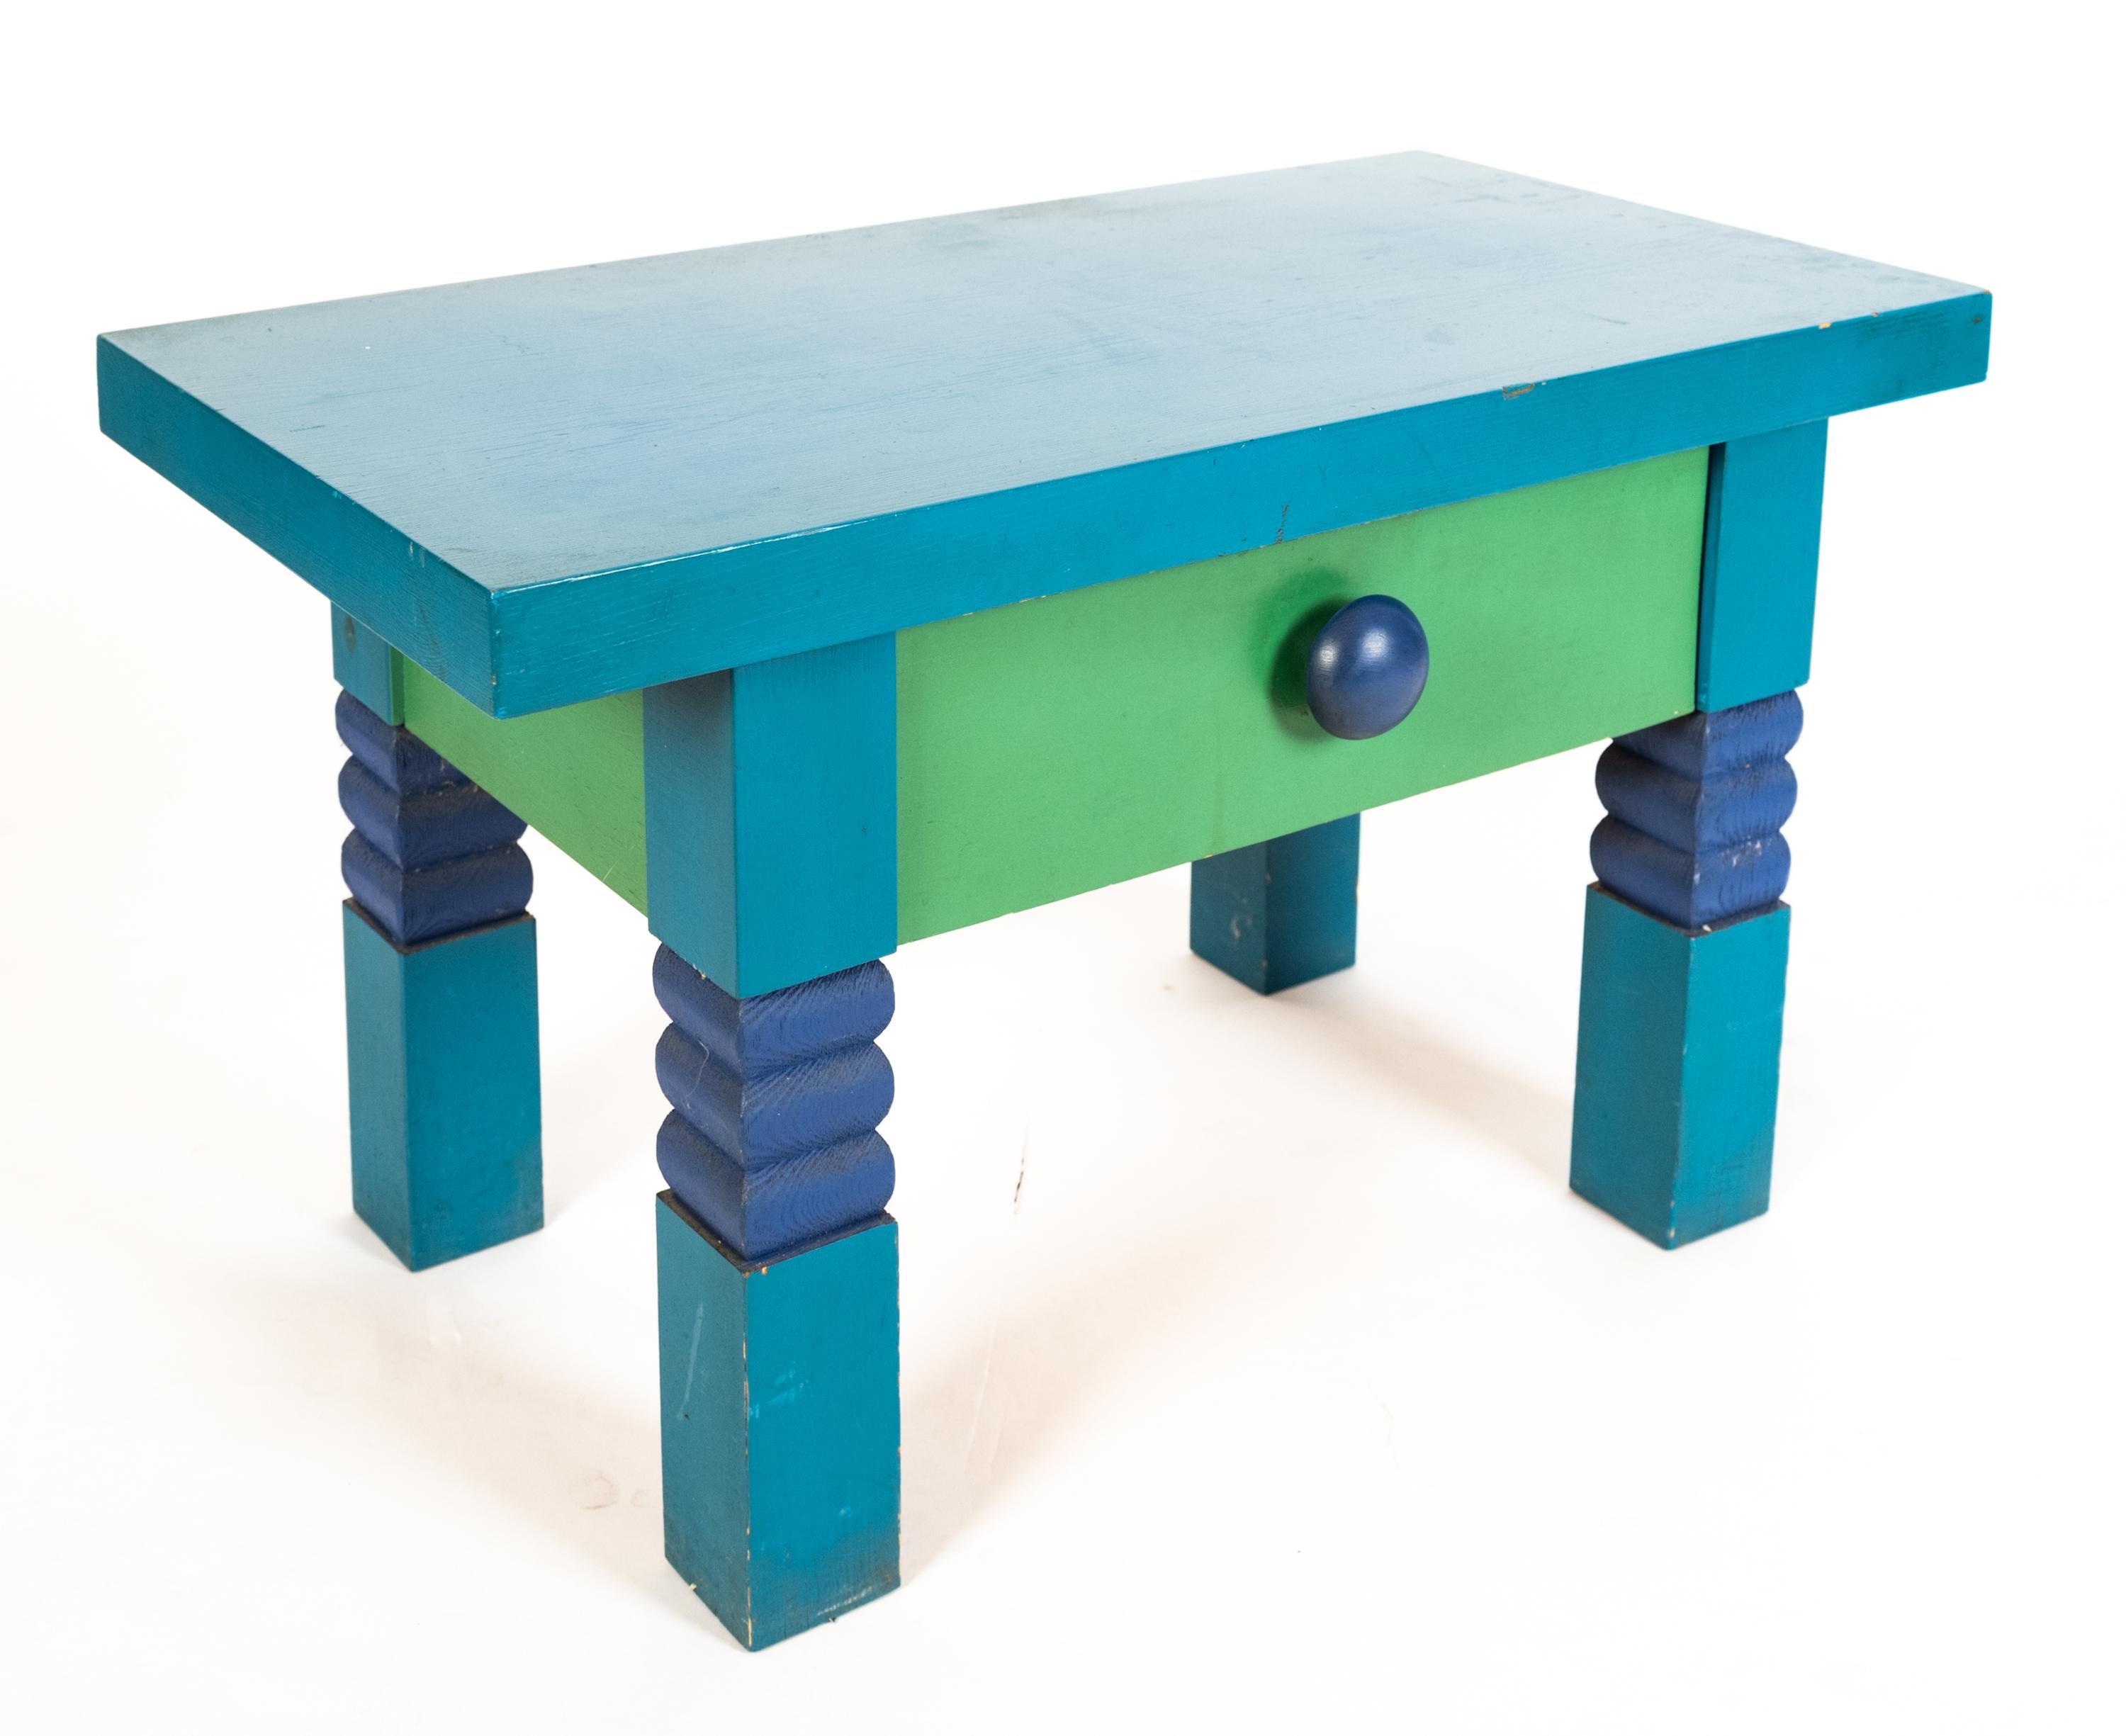 A Contemporary Century hall table and mirror by Swedish artist Erik Höglund (1932-1998) for Eriksmåla, Kosta Boda, 1967. Having a polychrome color scheme with a blue top resting upon four legs with carved dark blue rounded accents. Includes a green